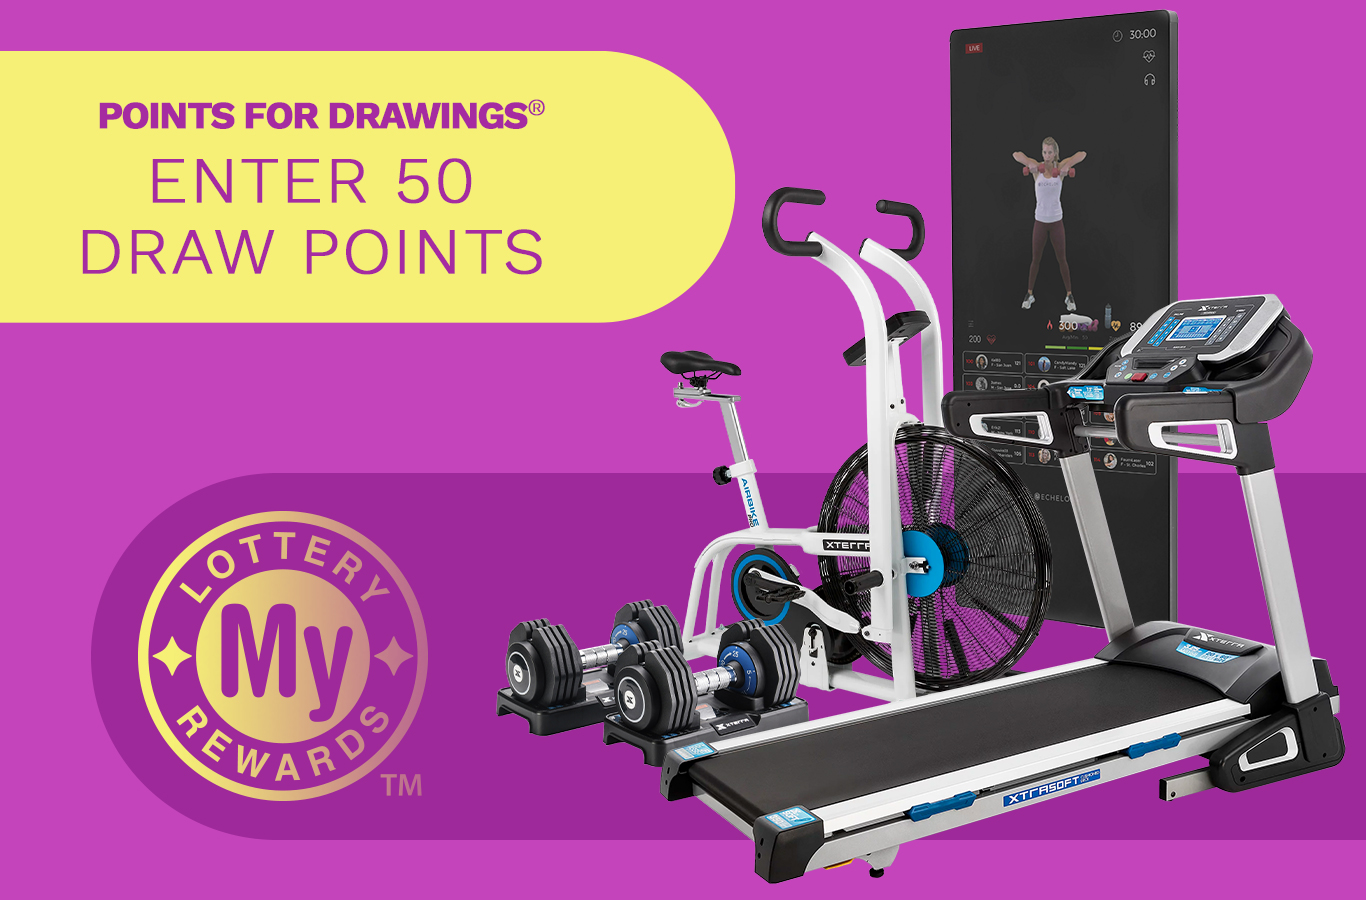 Here's your chance to win a Home Gym Package! Enter by Monday, April 1st.